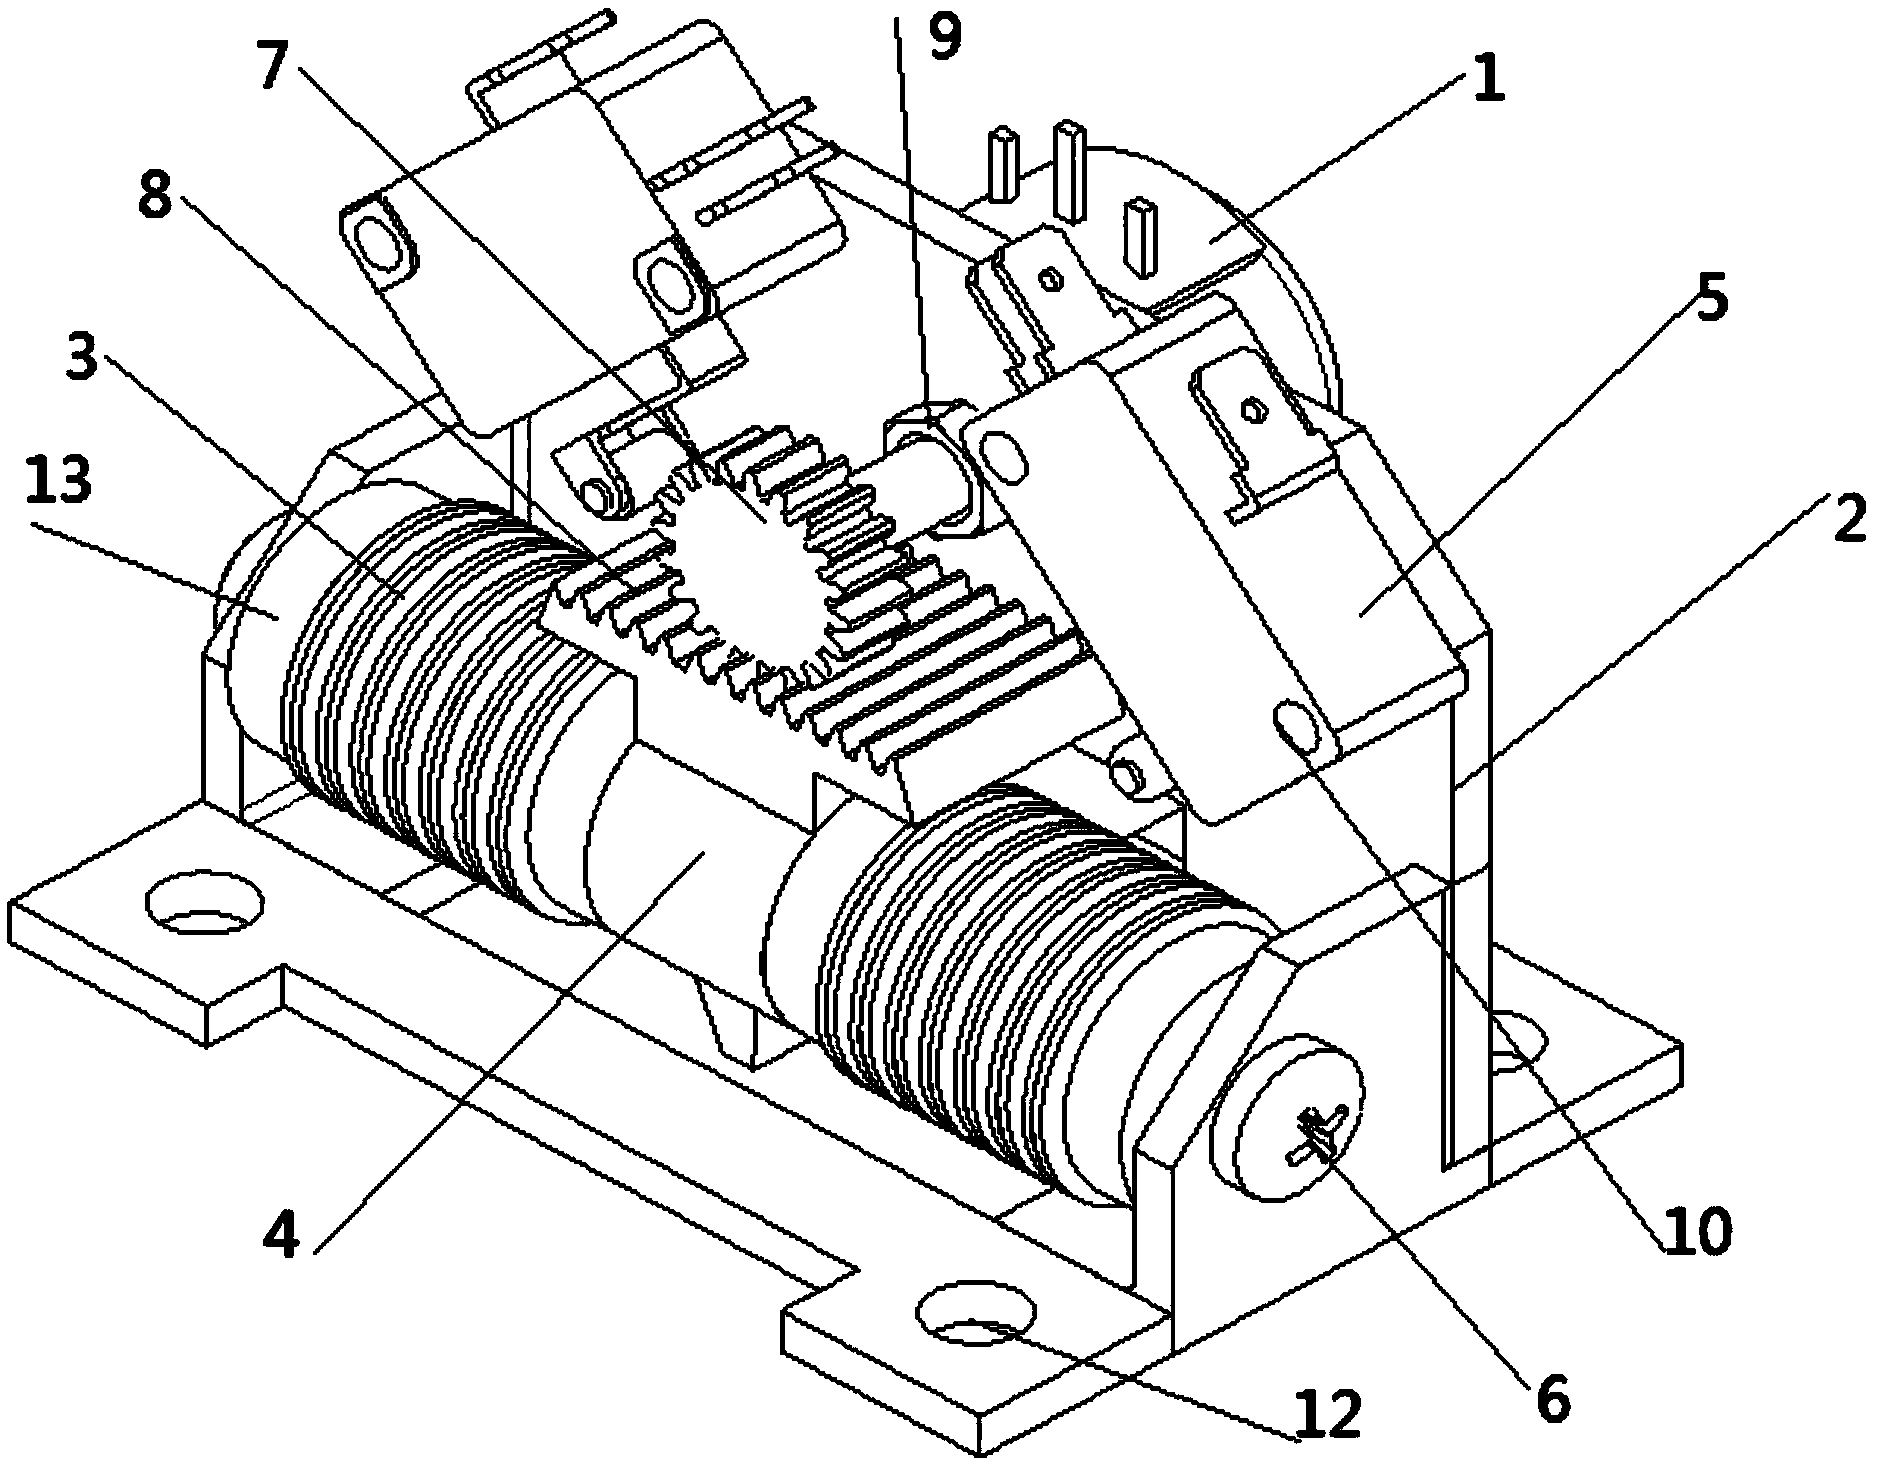 Electric actuator torque protection device